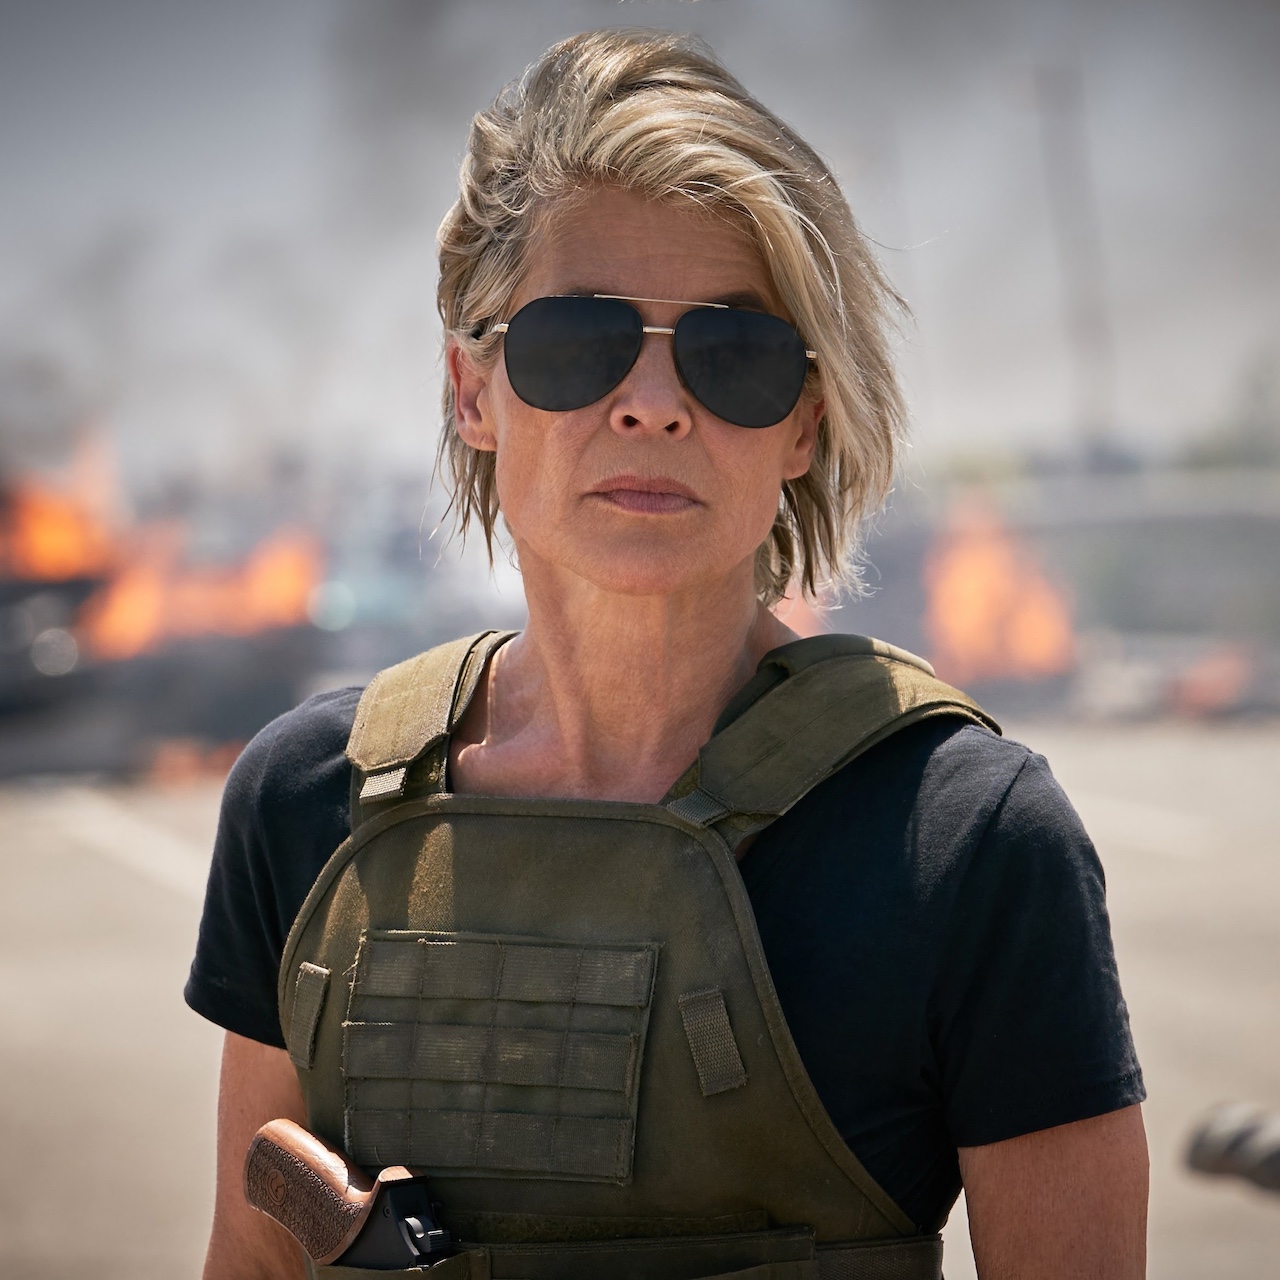 Sarah Connor, hero of the Terminator films and the Patron Saint of temporal self-determinacy.